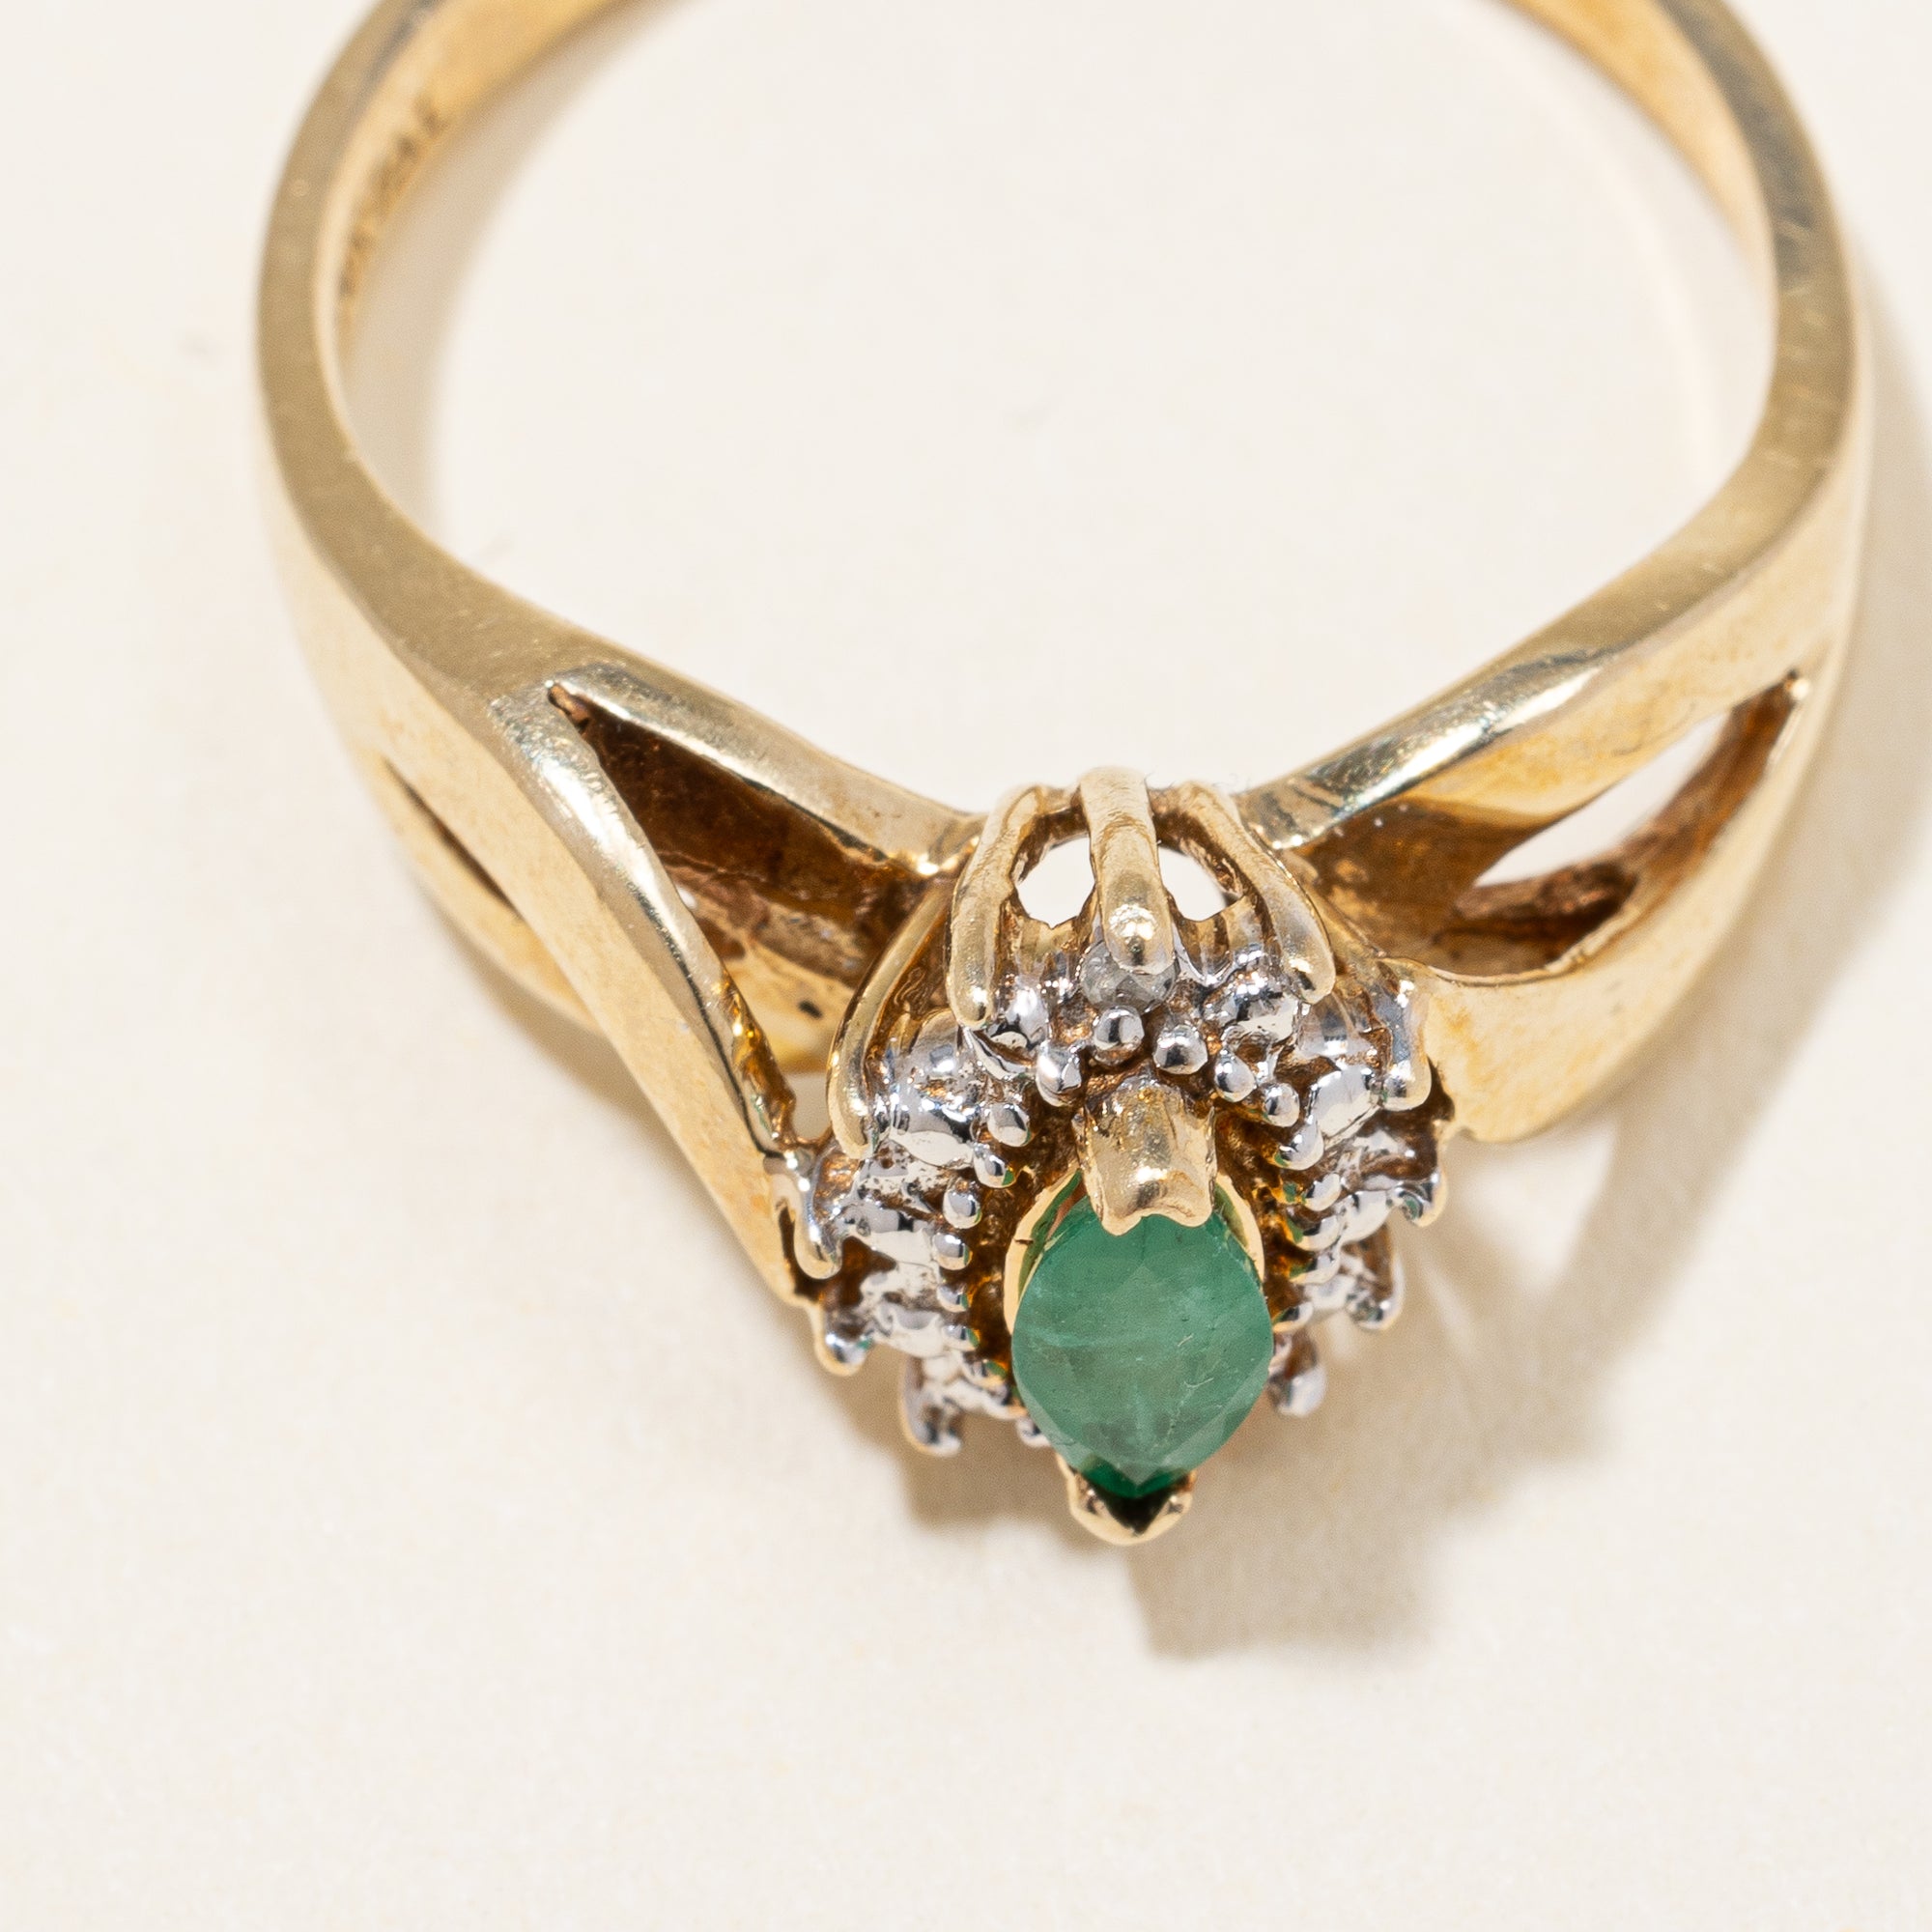 Marquise Cut Emerald and Diamond Halo Ring | 0.19 ctw | SZ 6.5 |